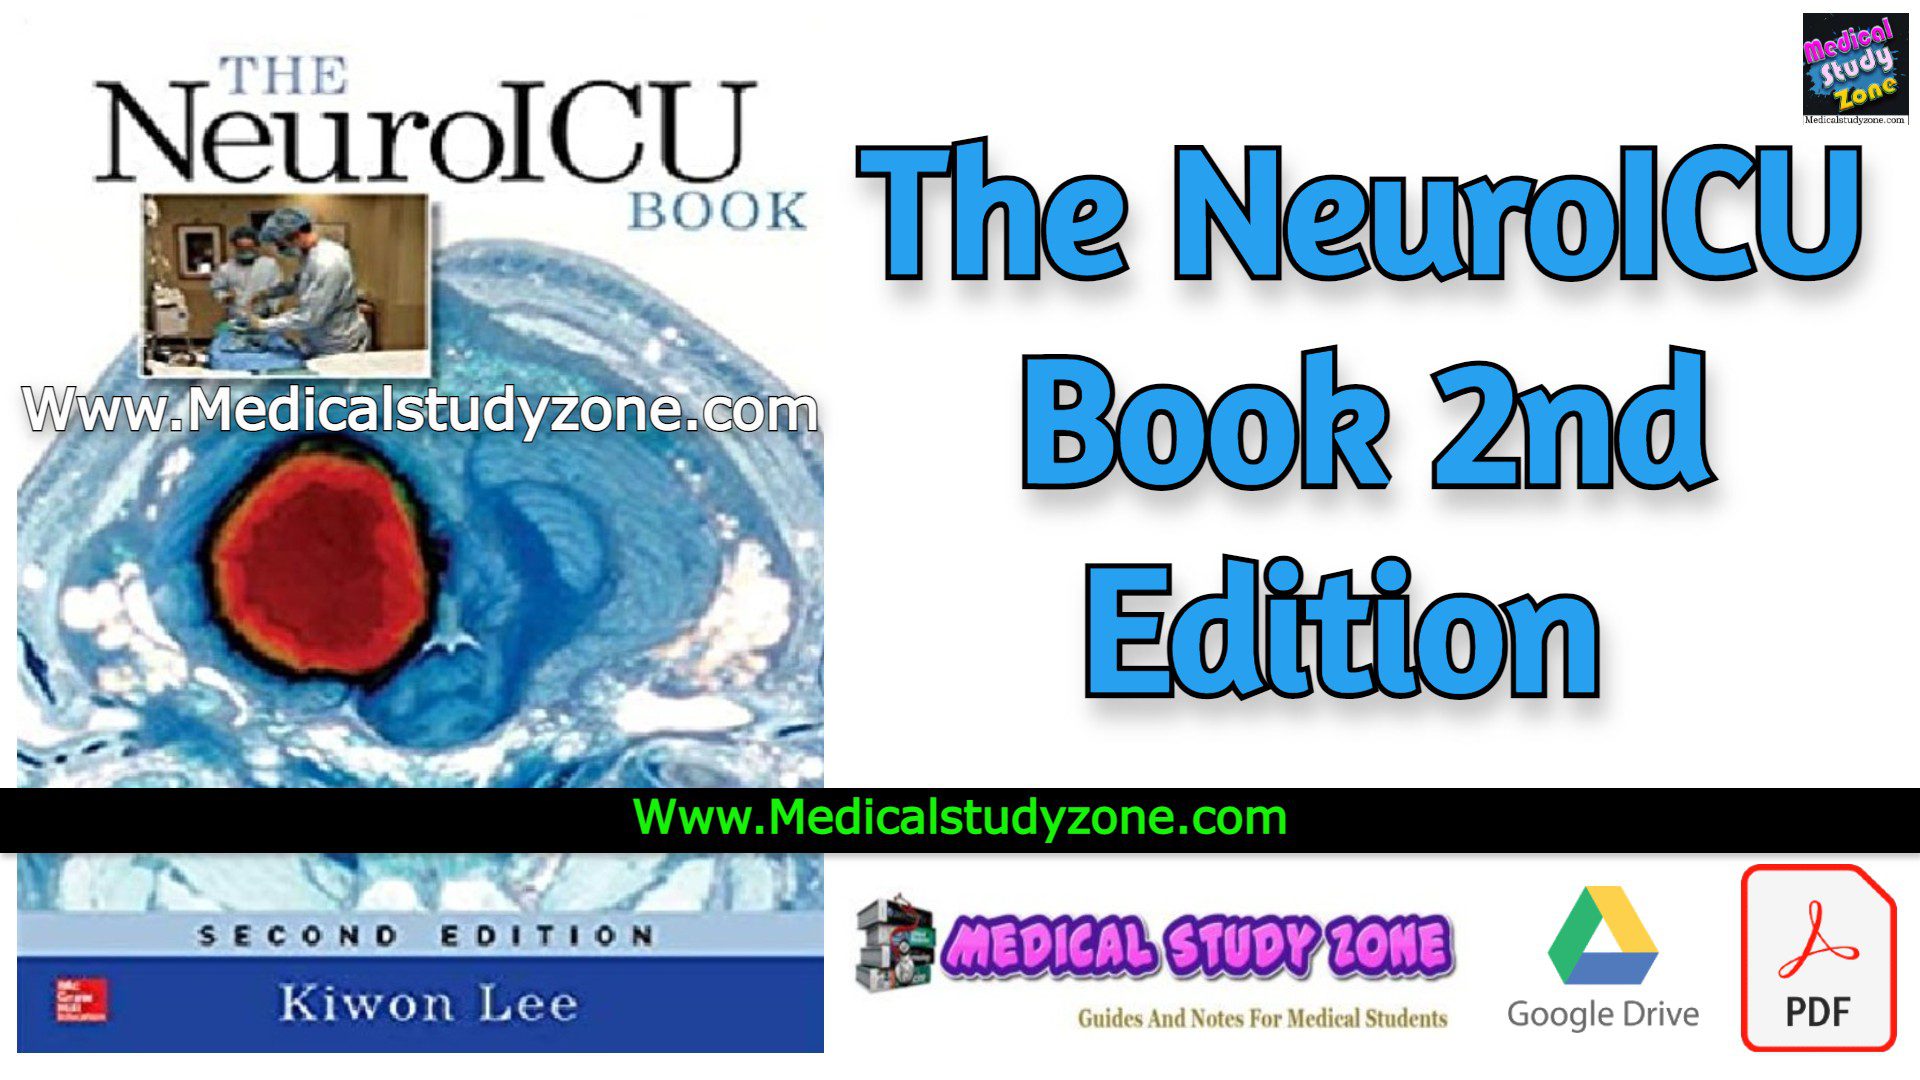 The NeuroICU Book 2nd Edition PDF Free Download [Google Drive]